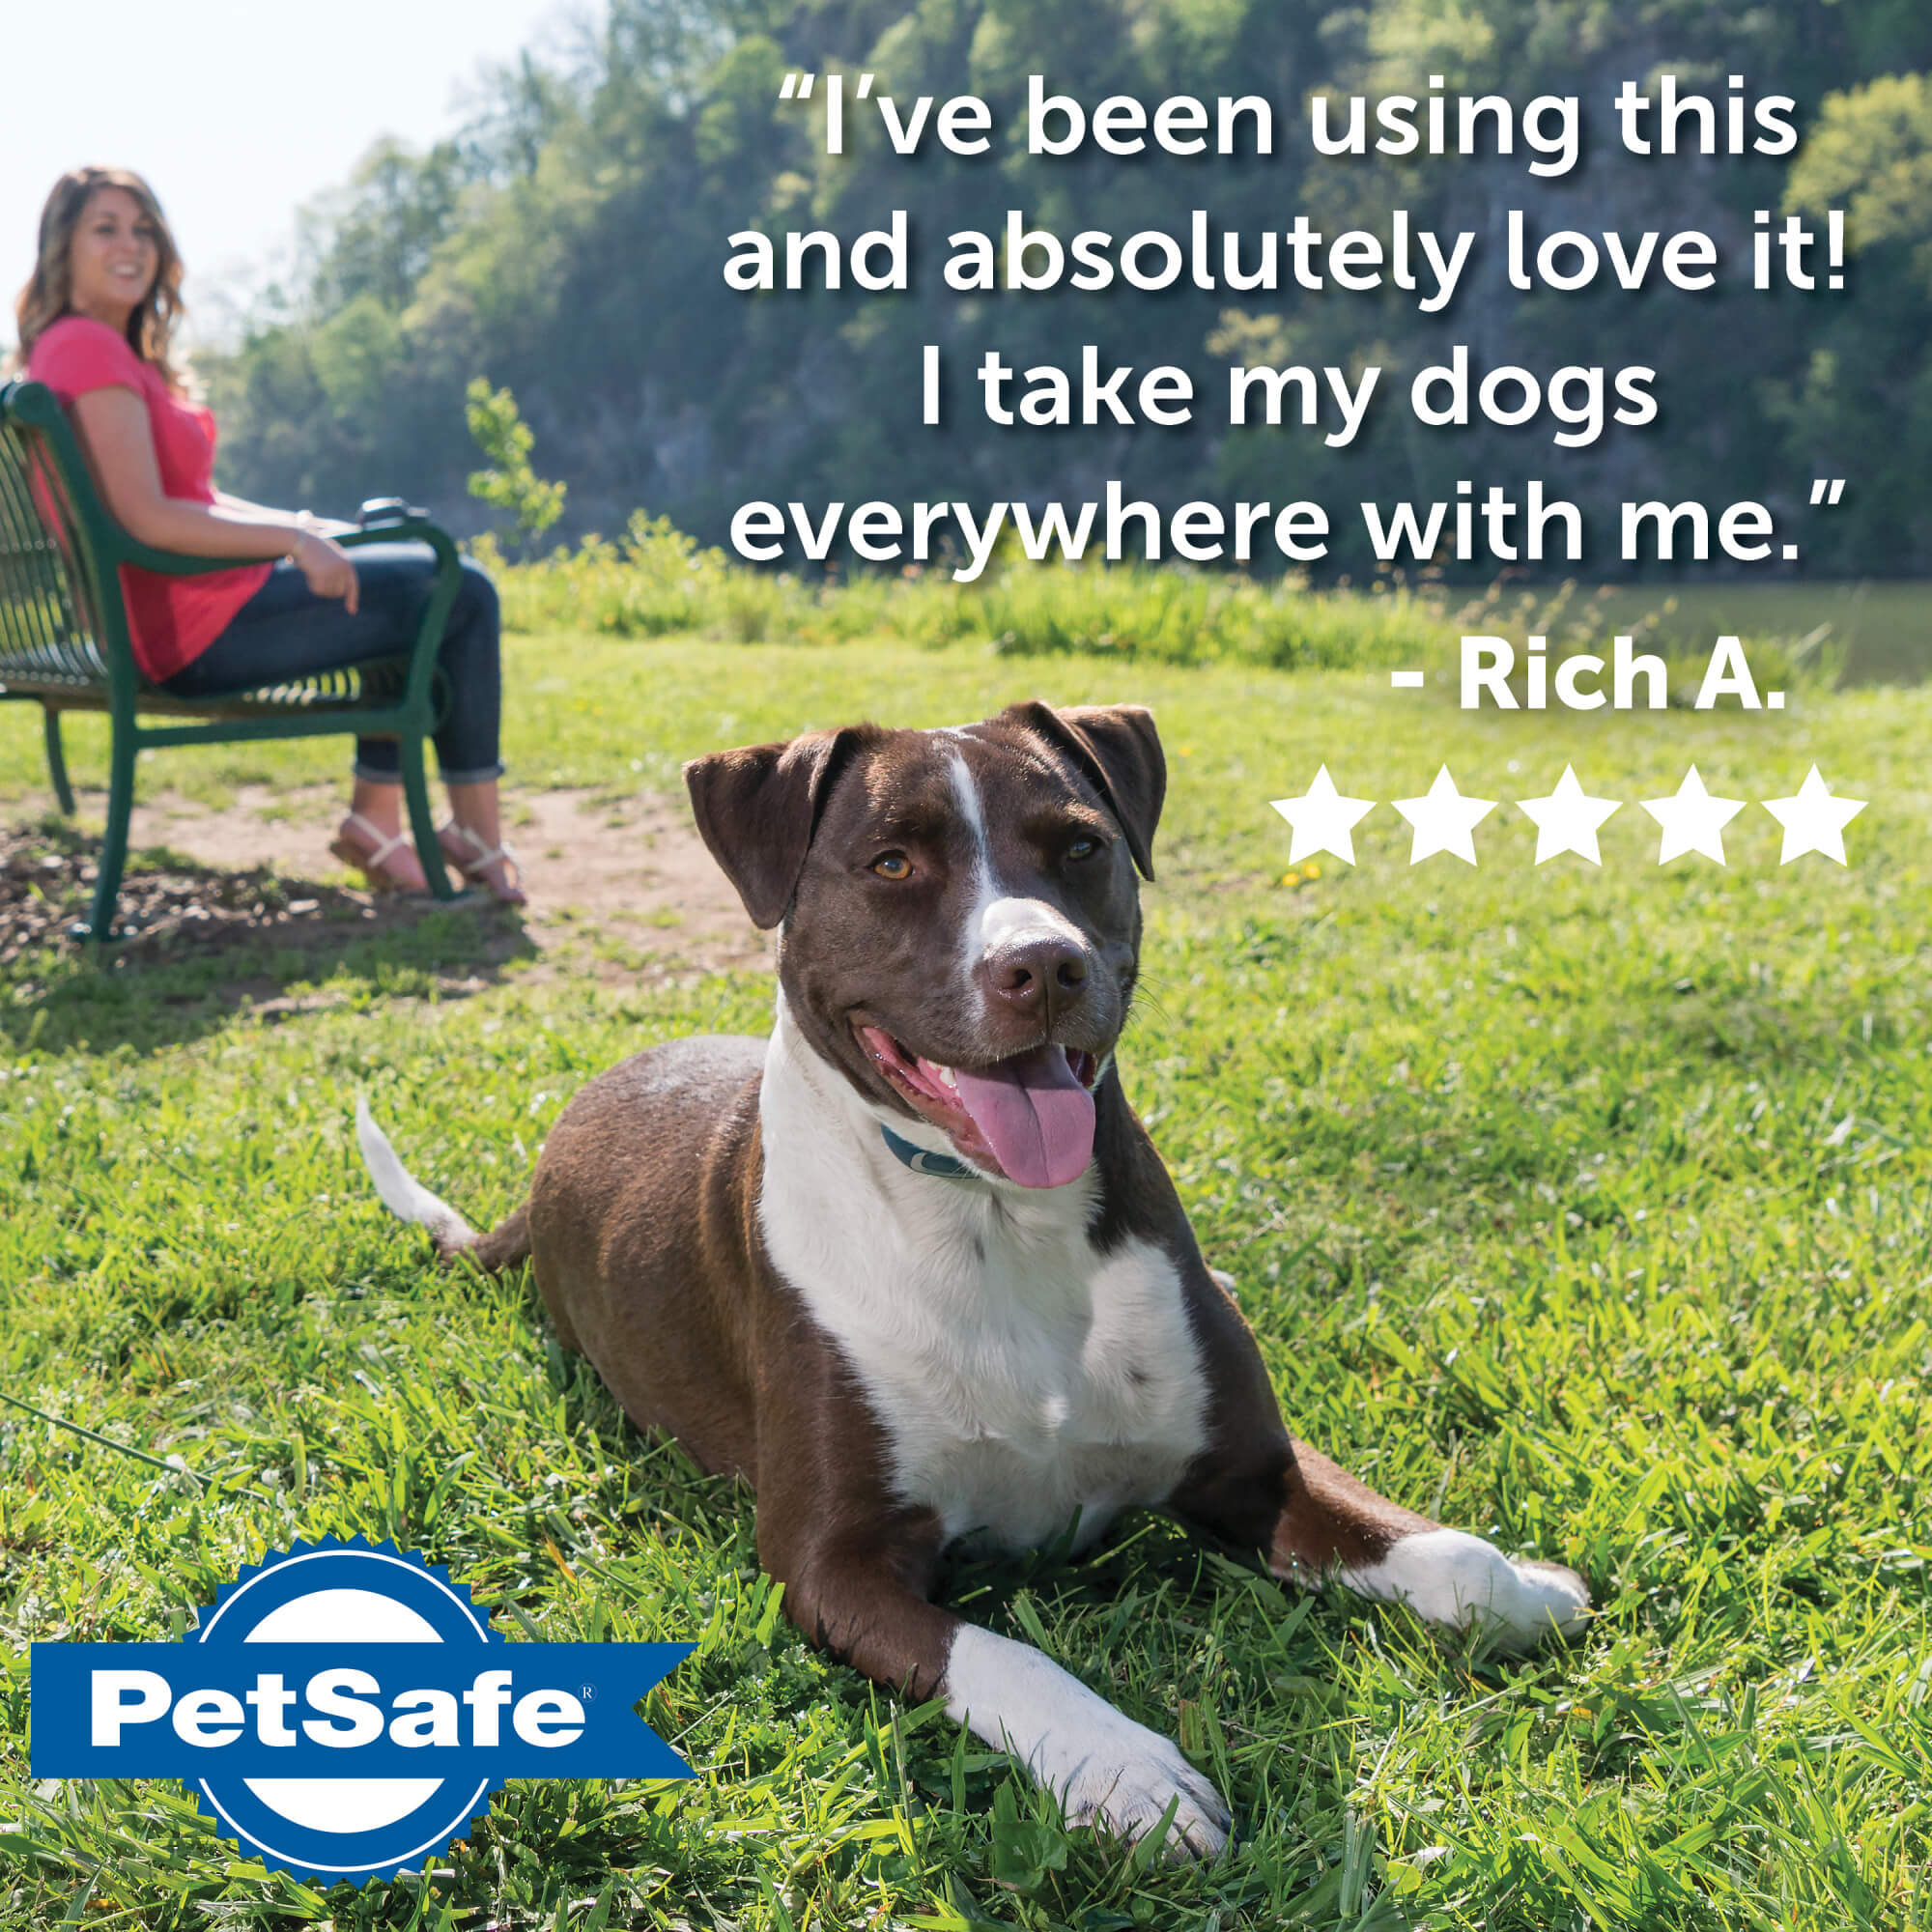 "I've been using this and absolutely love it! I take my dogs everywhere with me."